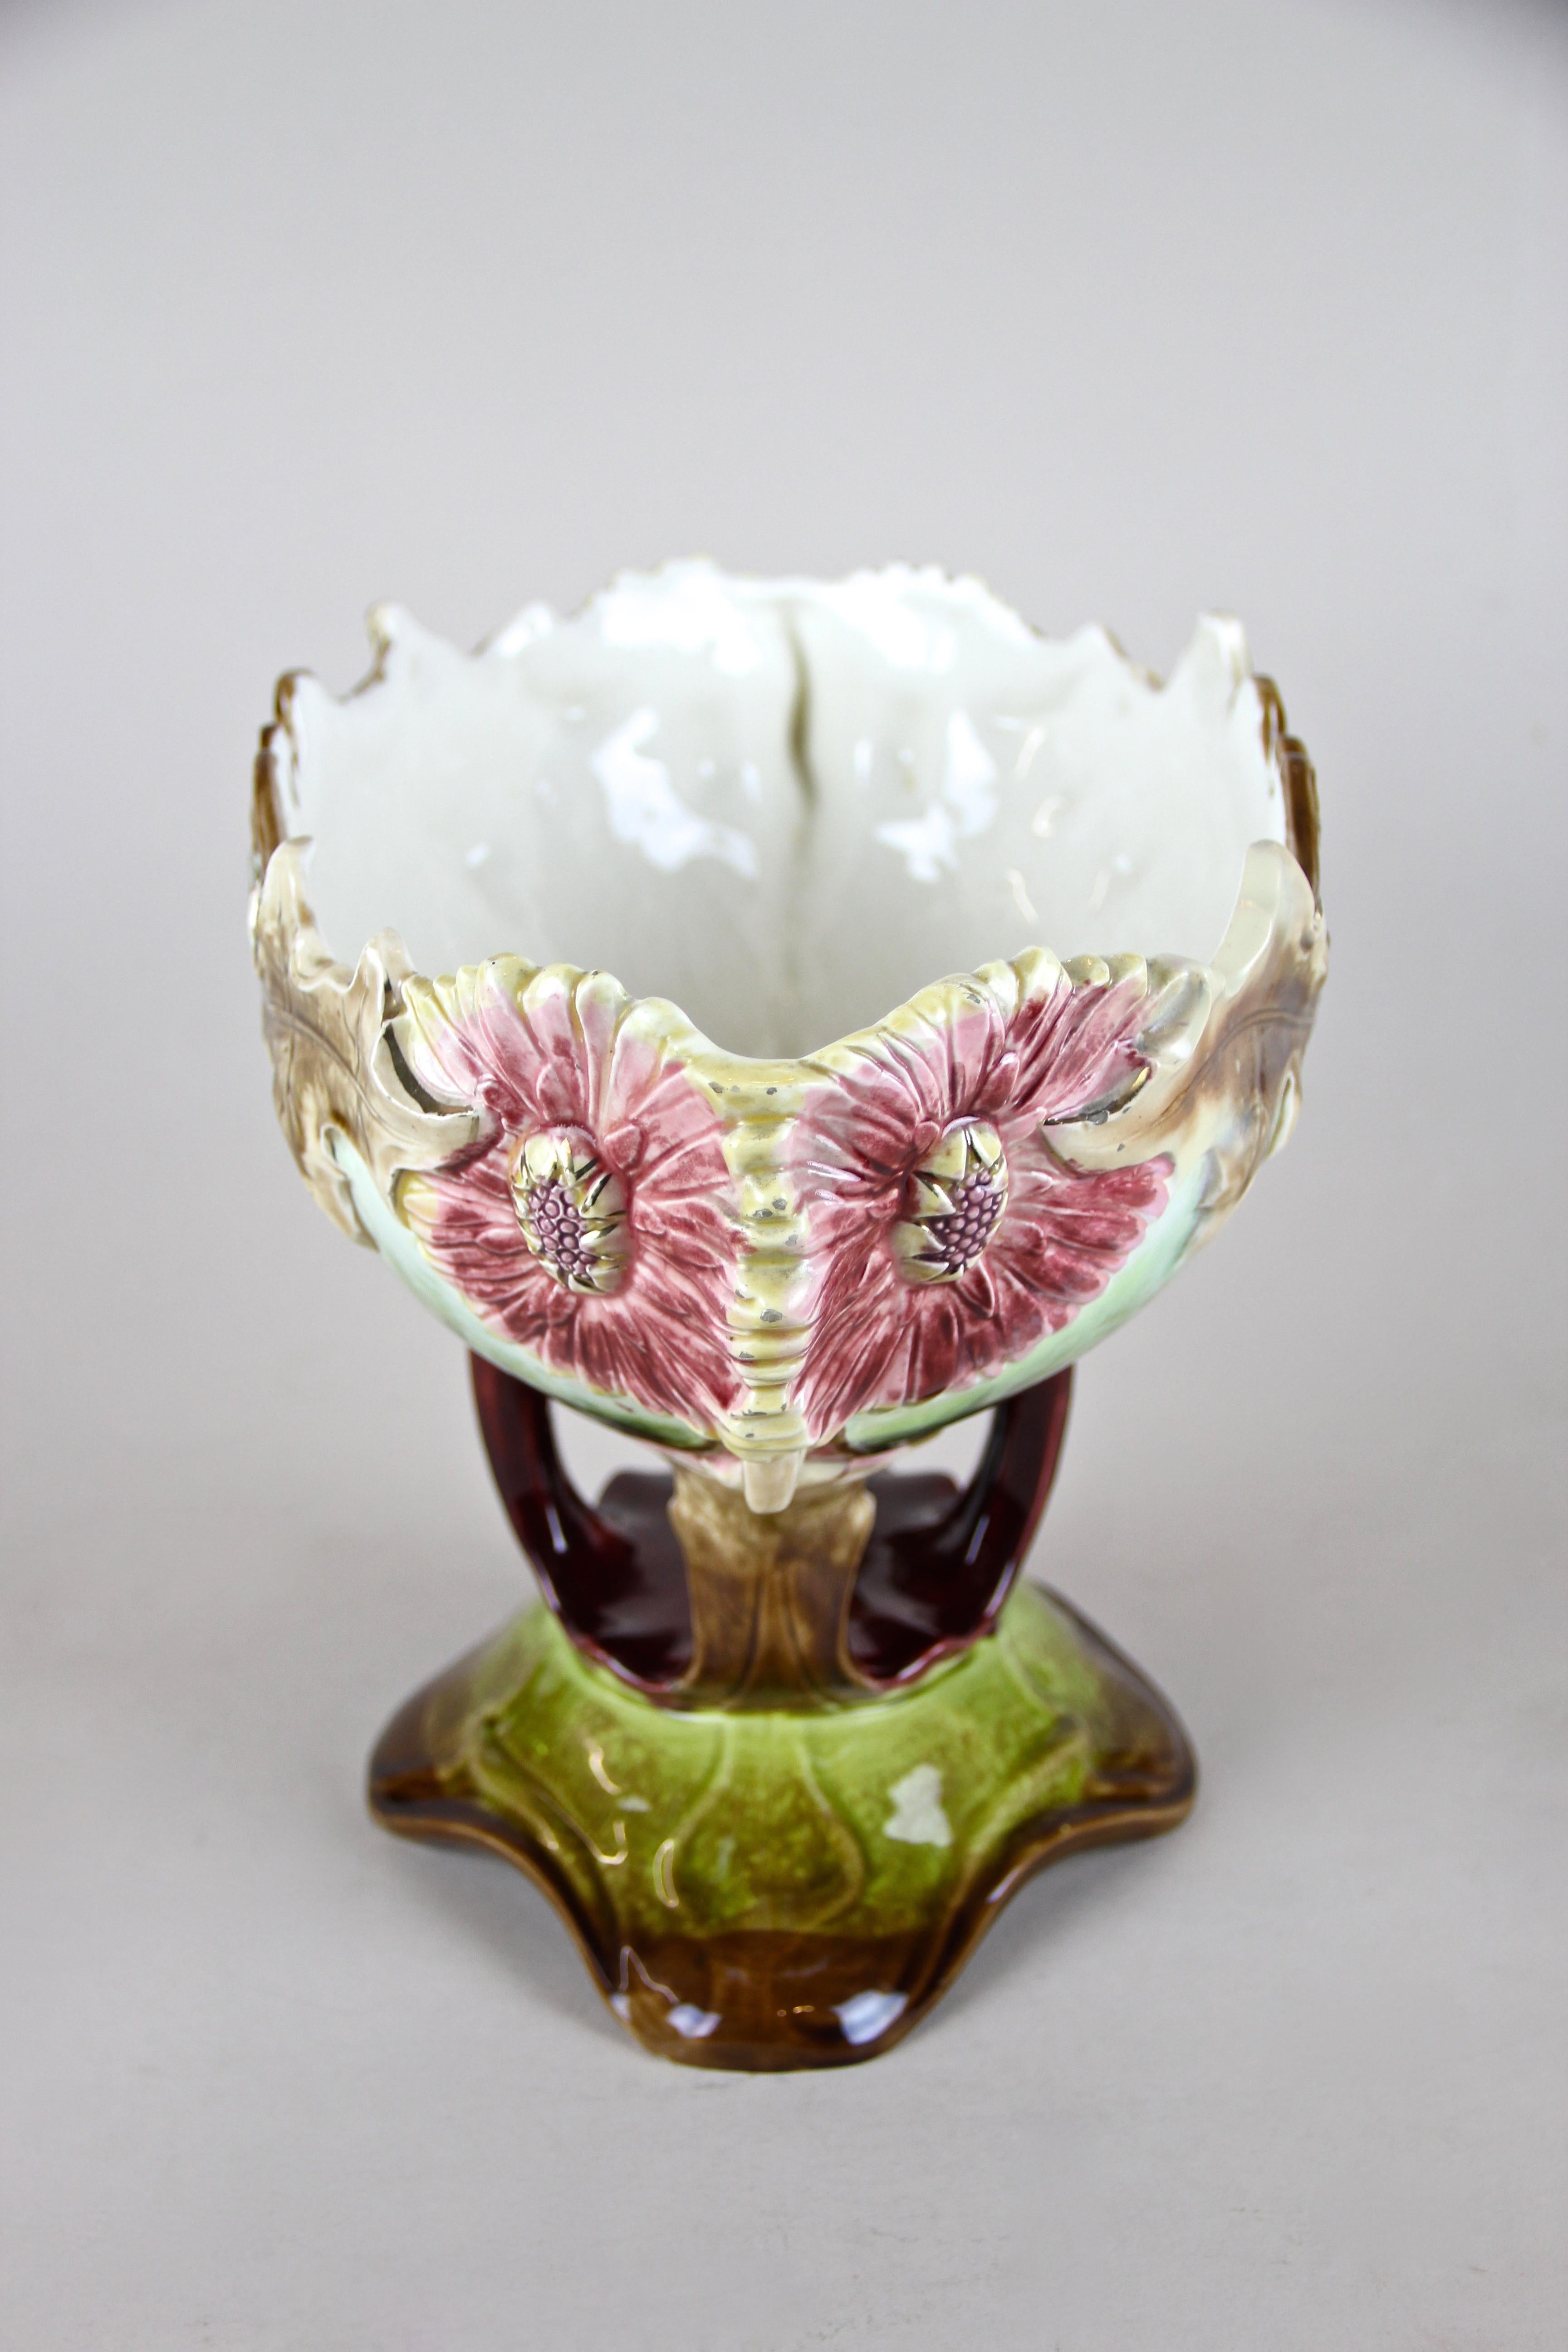 Another gorgeous Majolica jardinière or centerpiece in our collection, attributed to Julius Dressler, Bohemia, circa 1905. This exceptional shaped majolica item comes with beautiful organic lines and a floral theme, showing a mesmerizing coloration